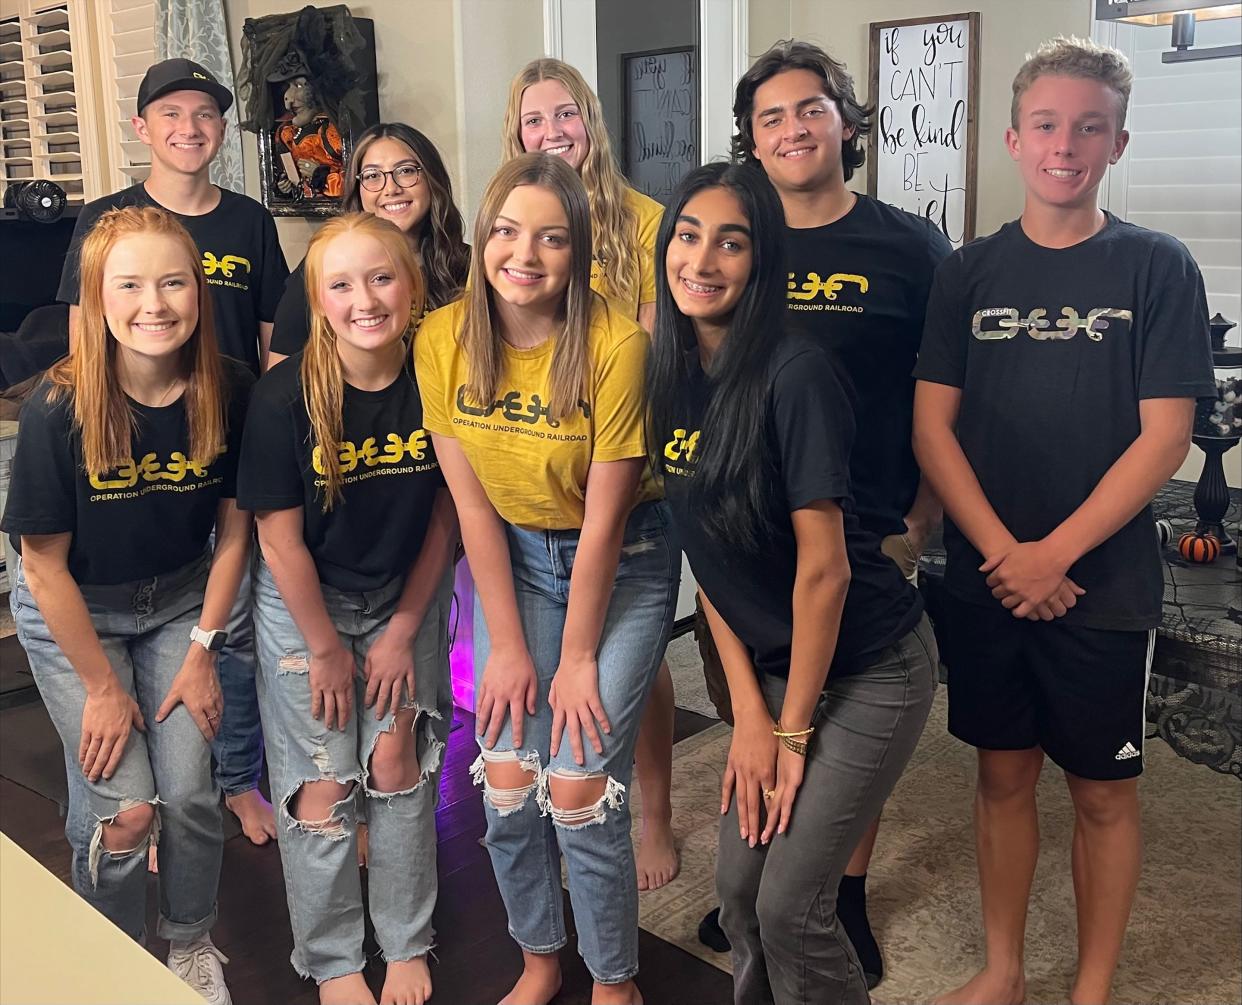 Izek Nelson started the Students Against Trafficking Club when he was a freshman at Redwood High School. Two years later, Nelson and his classmates are holding their first event to hosting their first event to help bring awareness about human trafficking.